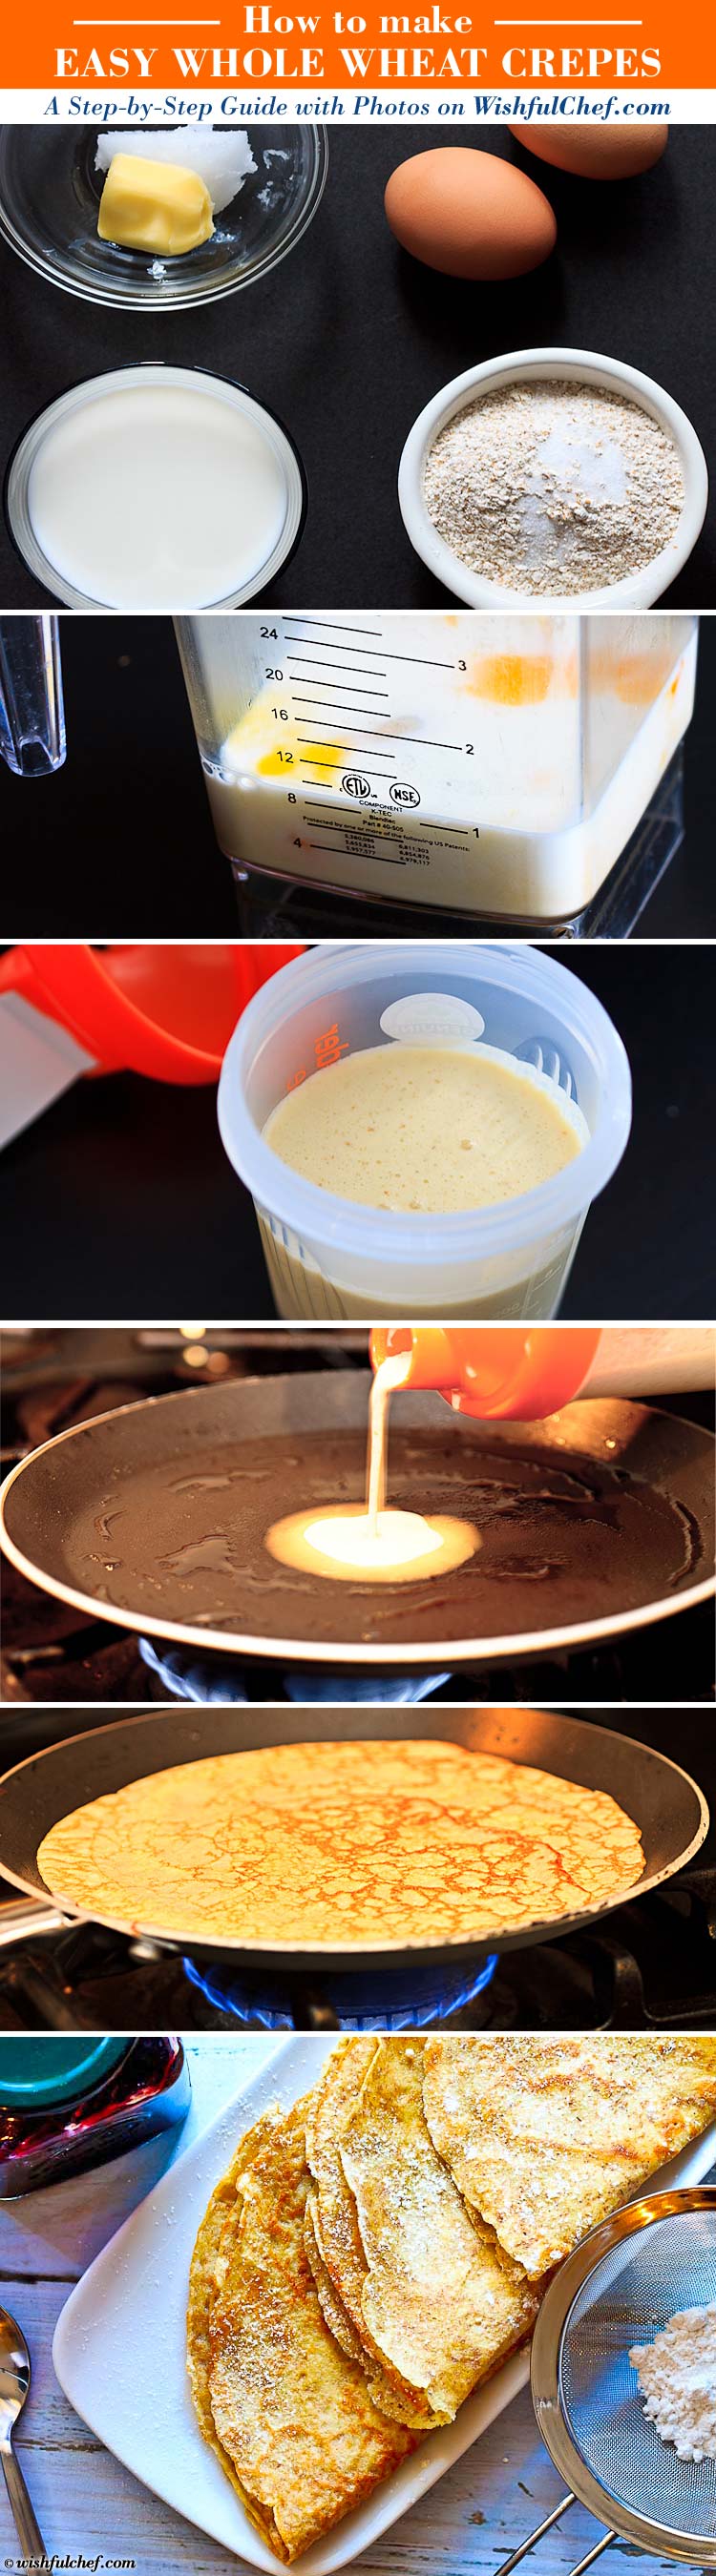 Step-by-Step: Easy Whole Wheat Crepes